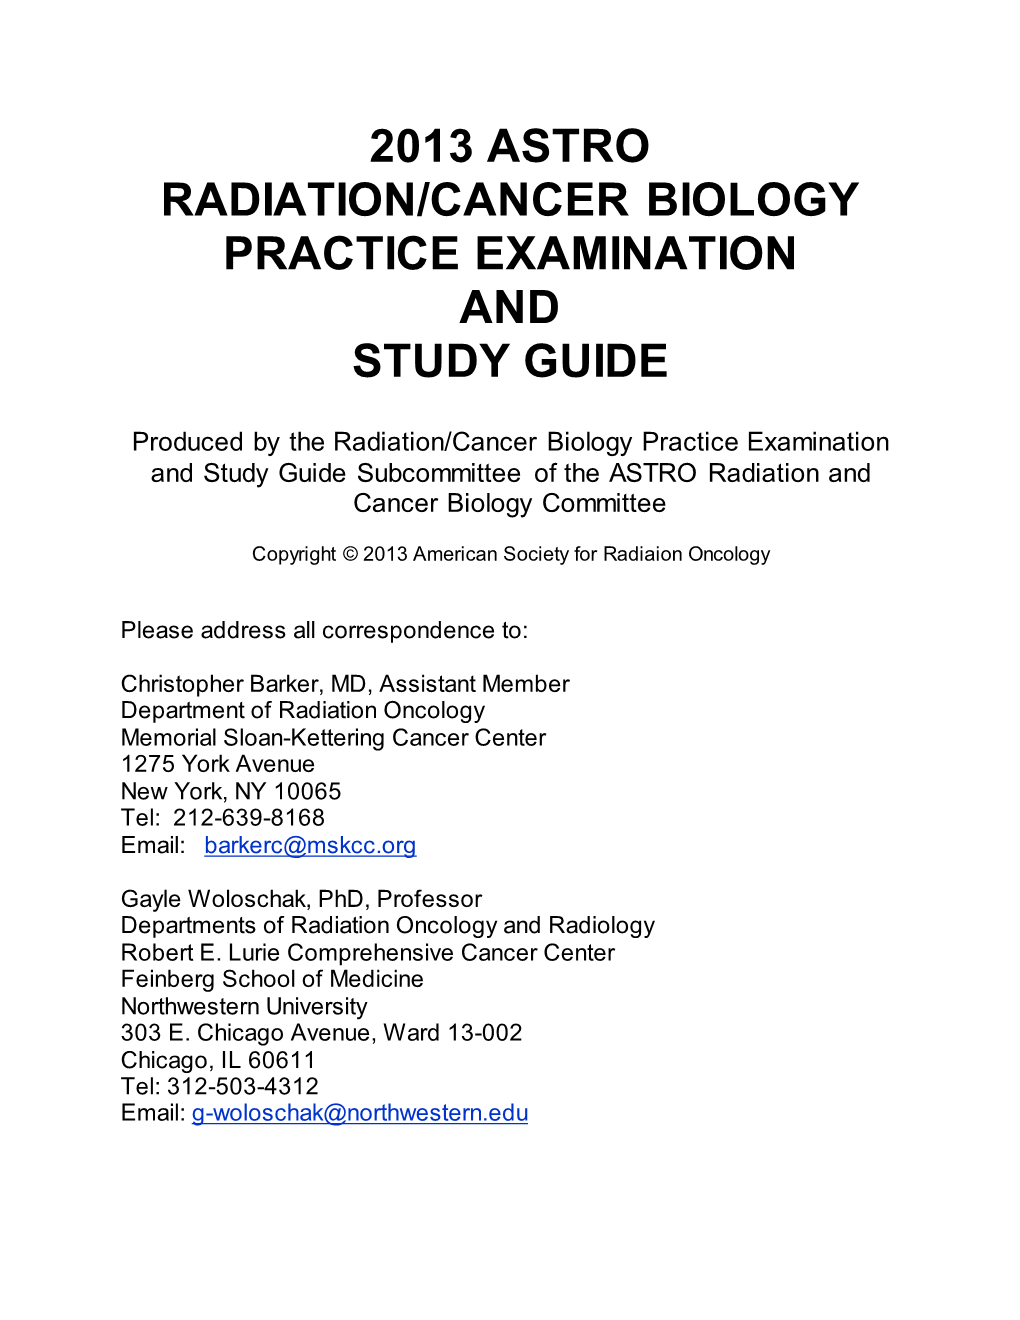 2013 Astro Radiation/Cancer Biology Practice Examination and Study Guide